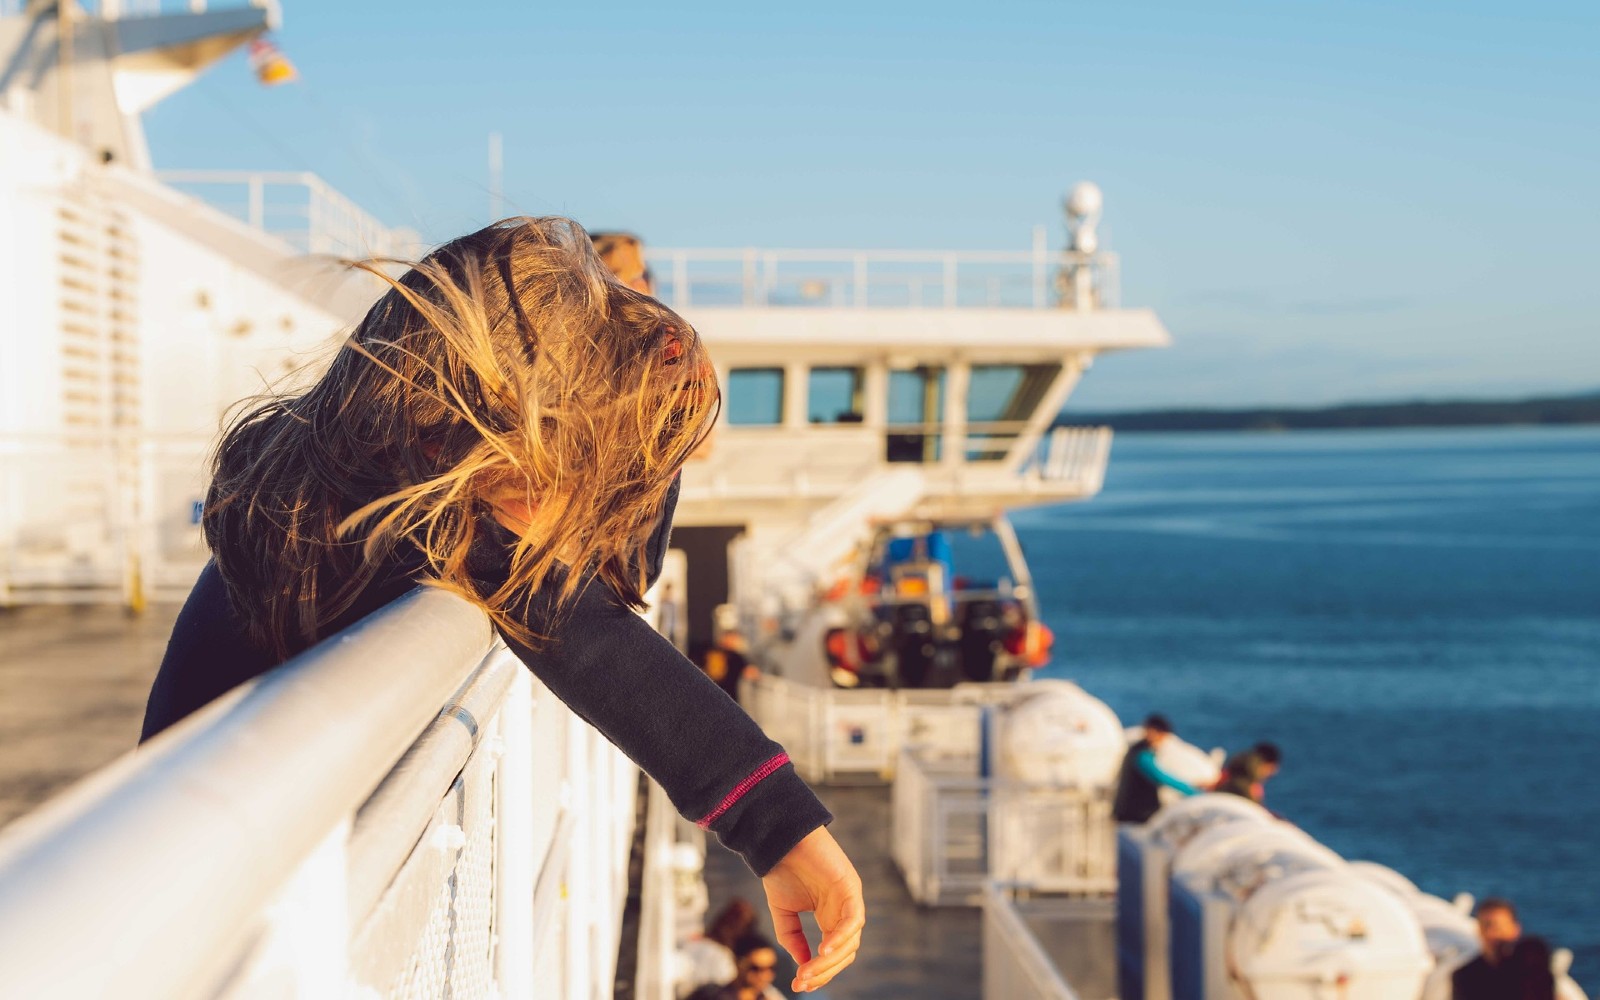 A girl enjoys the views on the Vancouver to Victoria ferry